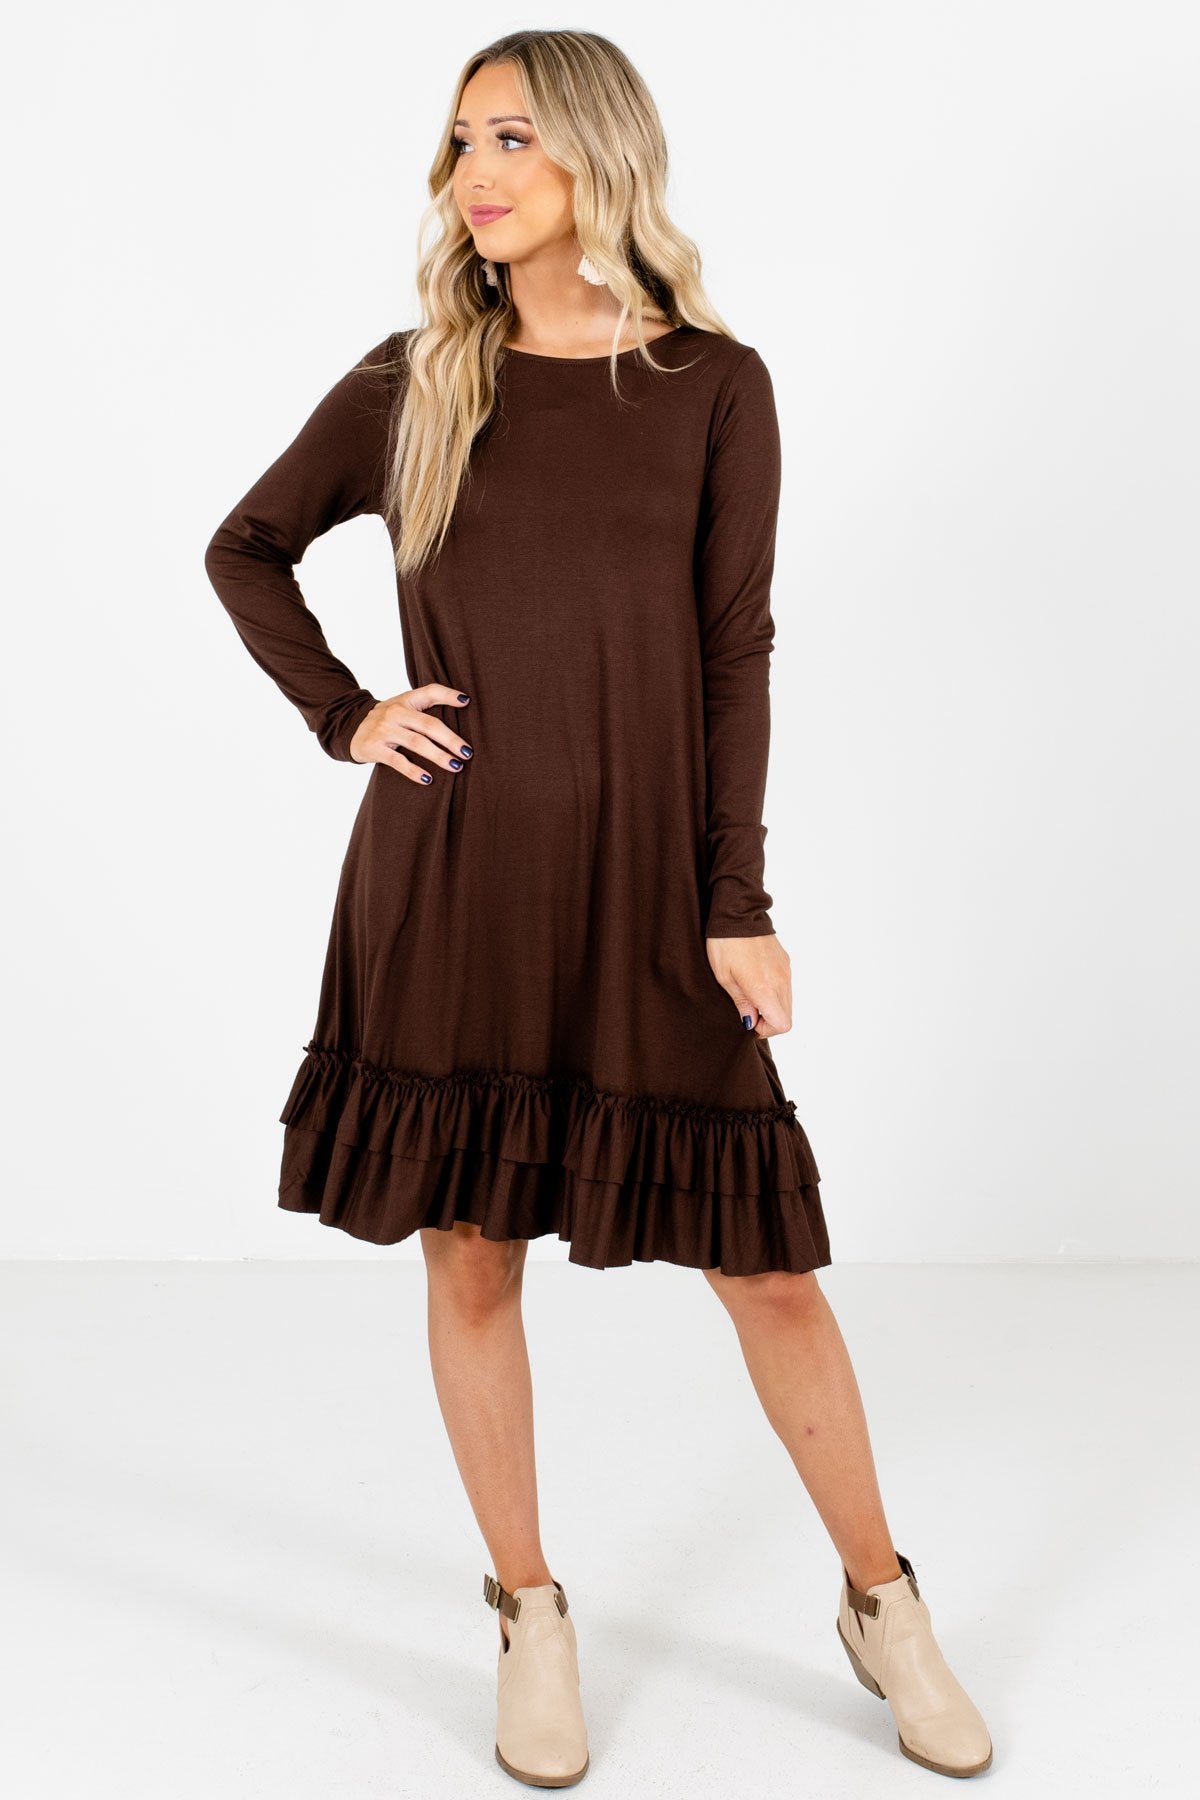 Women's Brown High-Quality Boutique Knee-Length Dresses